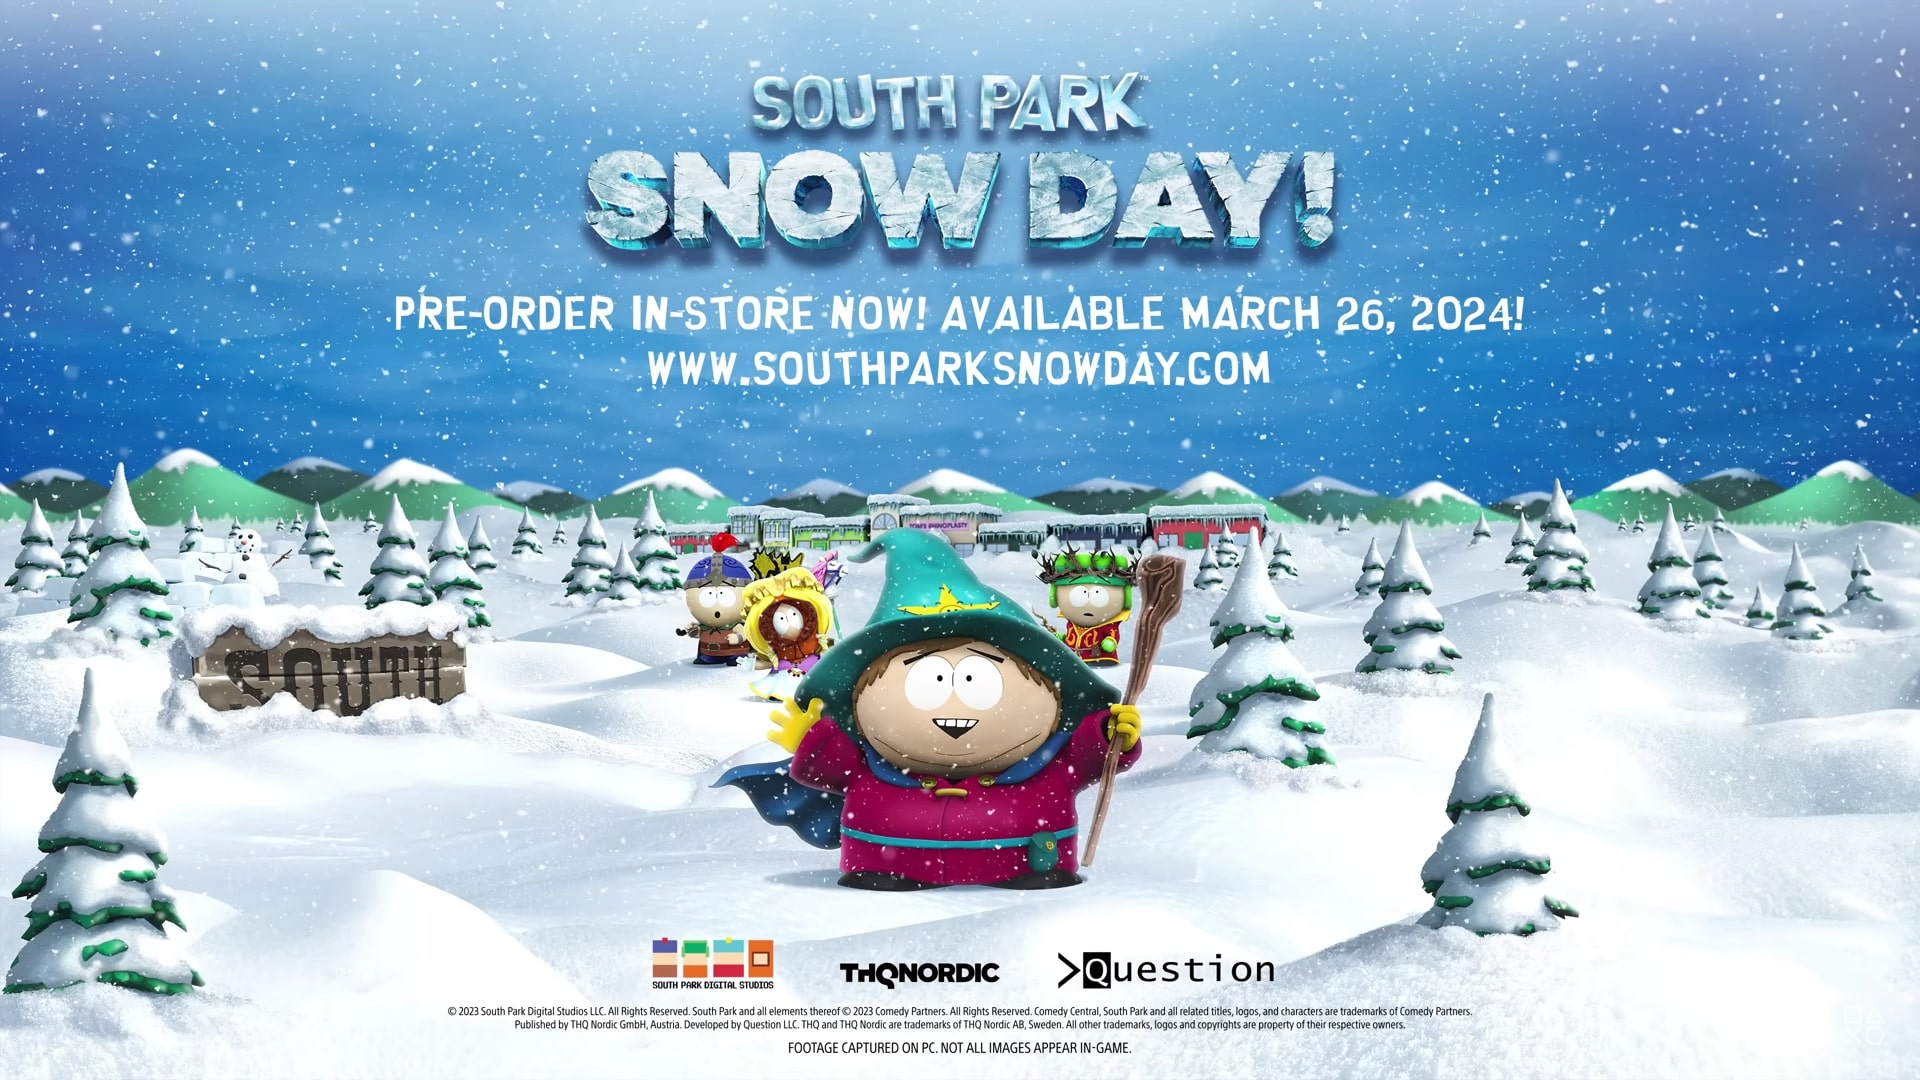 Get Ready for South Park: Snow Day! - Exciting 3D Adventures Available at an Affordable $30 Price!